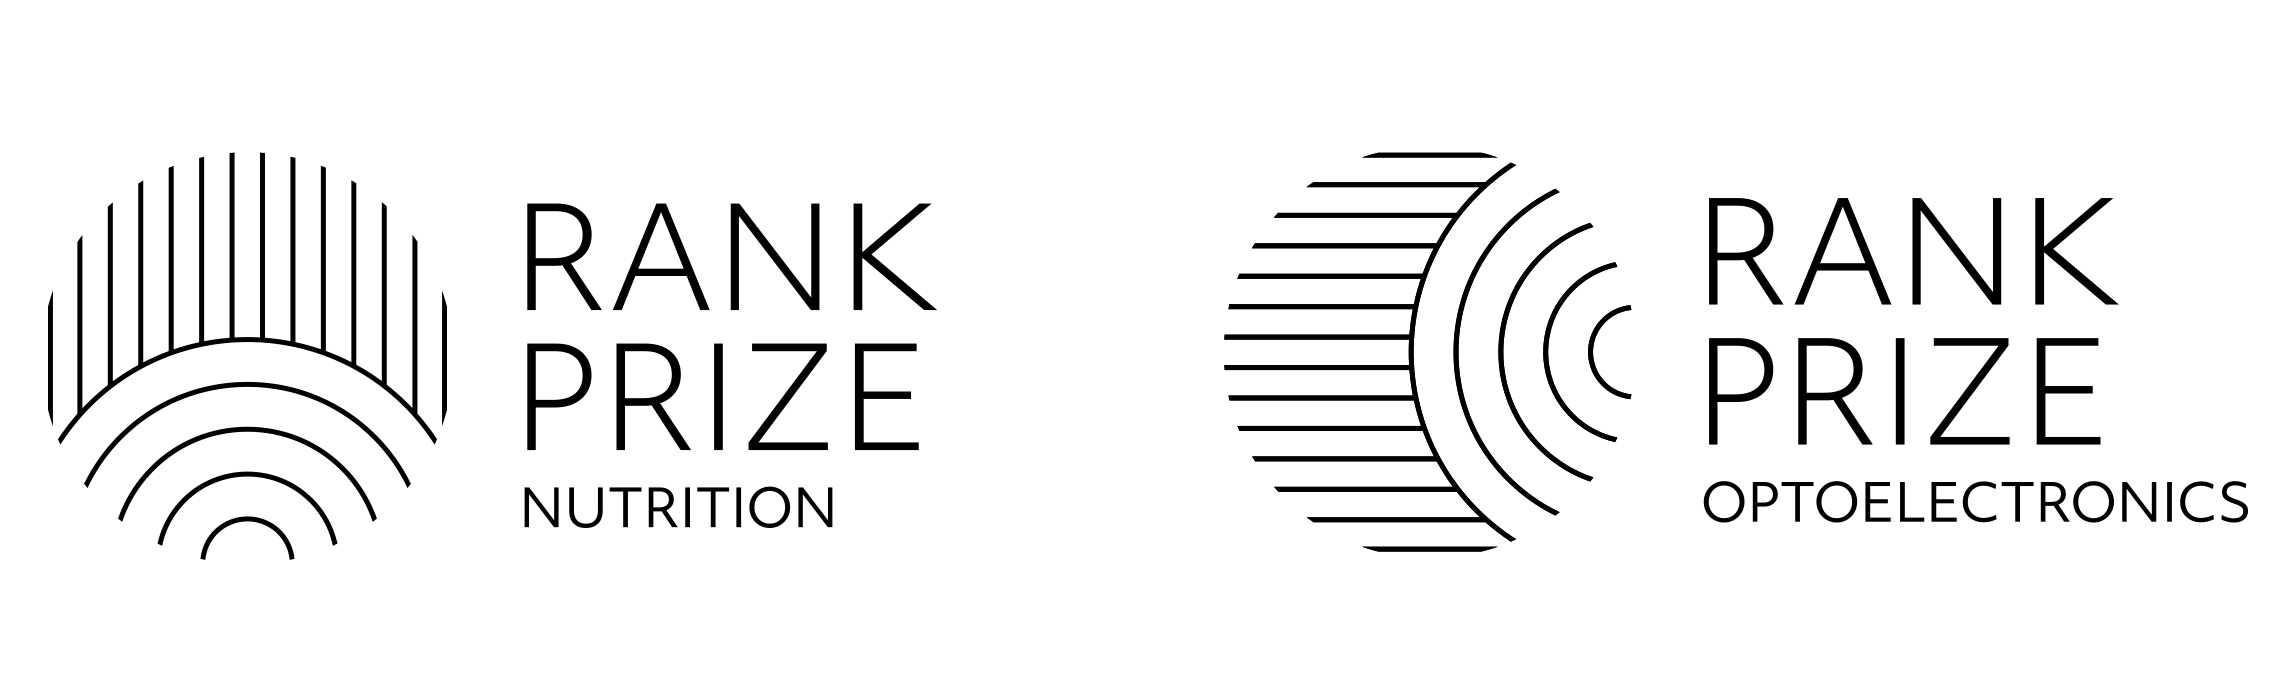 rank prize nutrition optoelectronics logos charity rebrand logos together